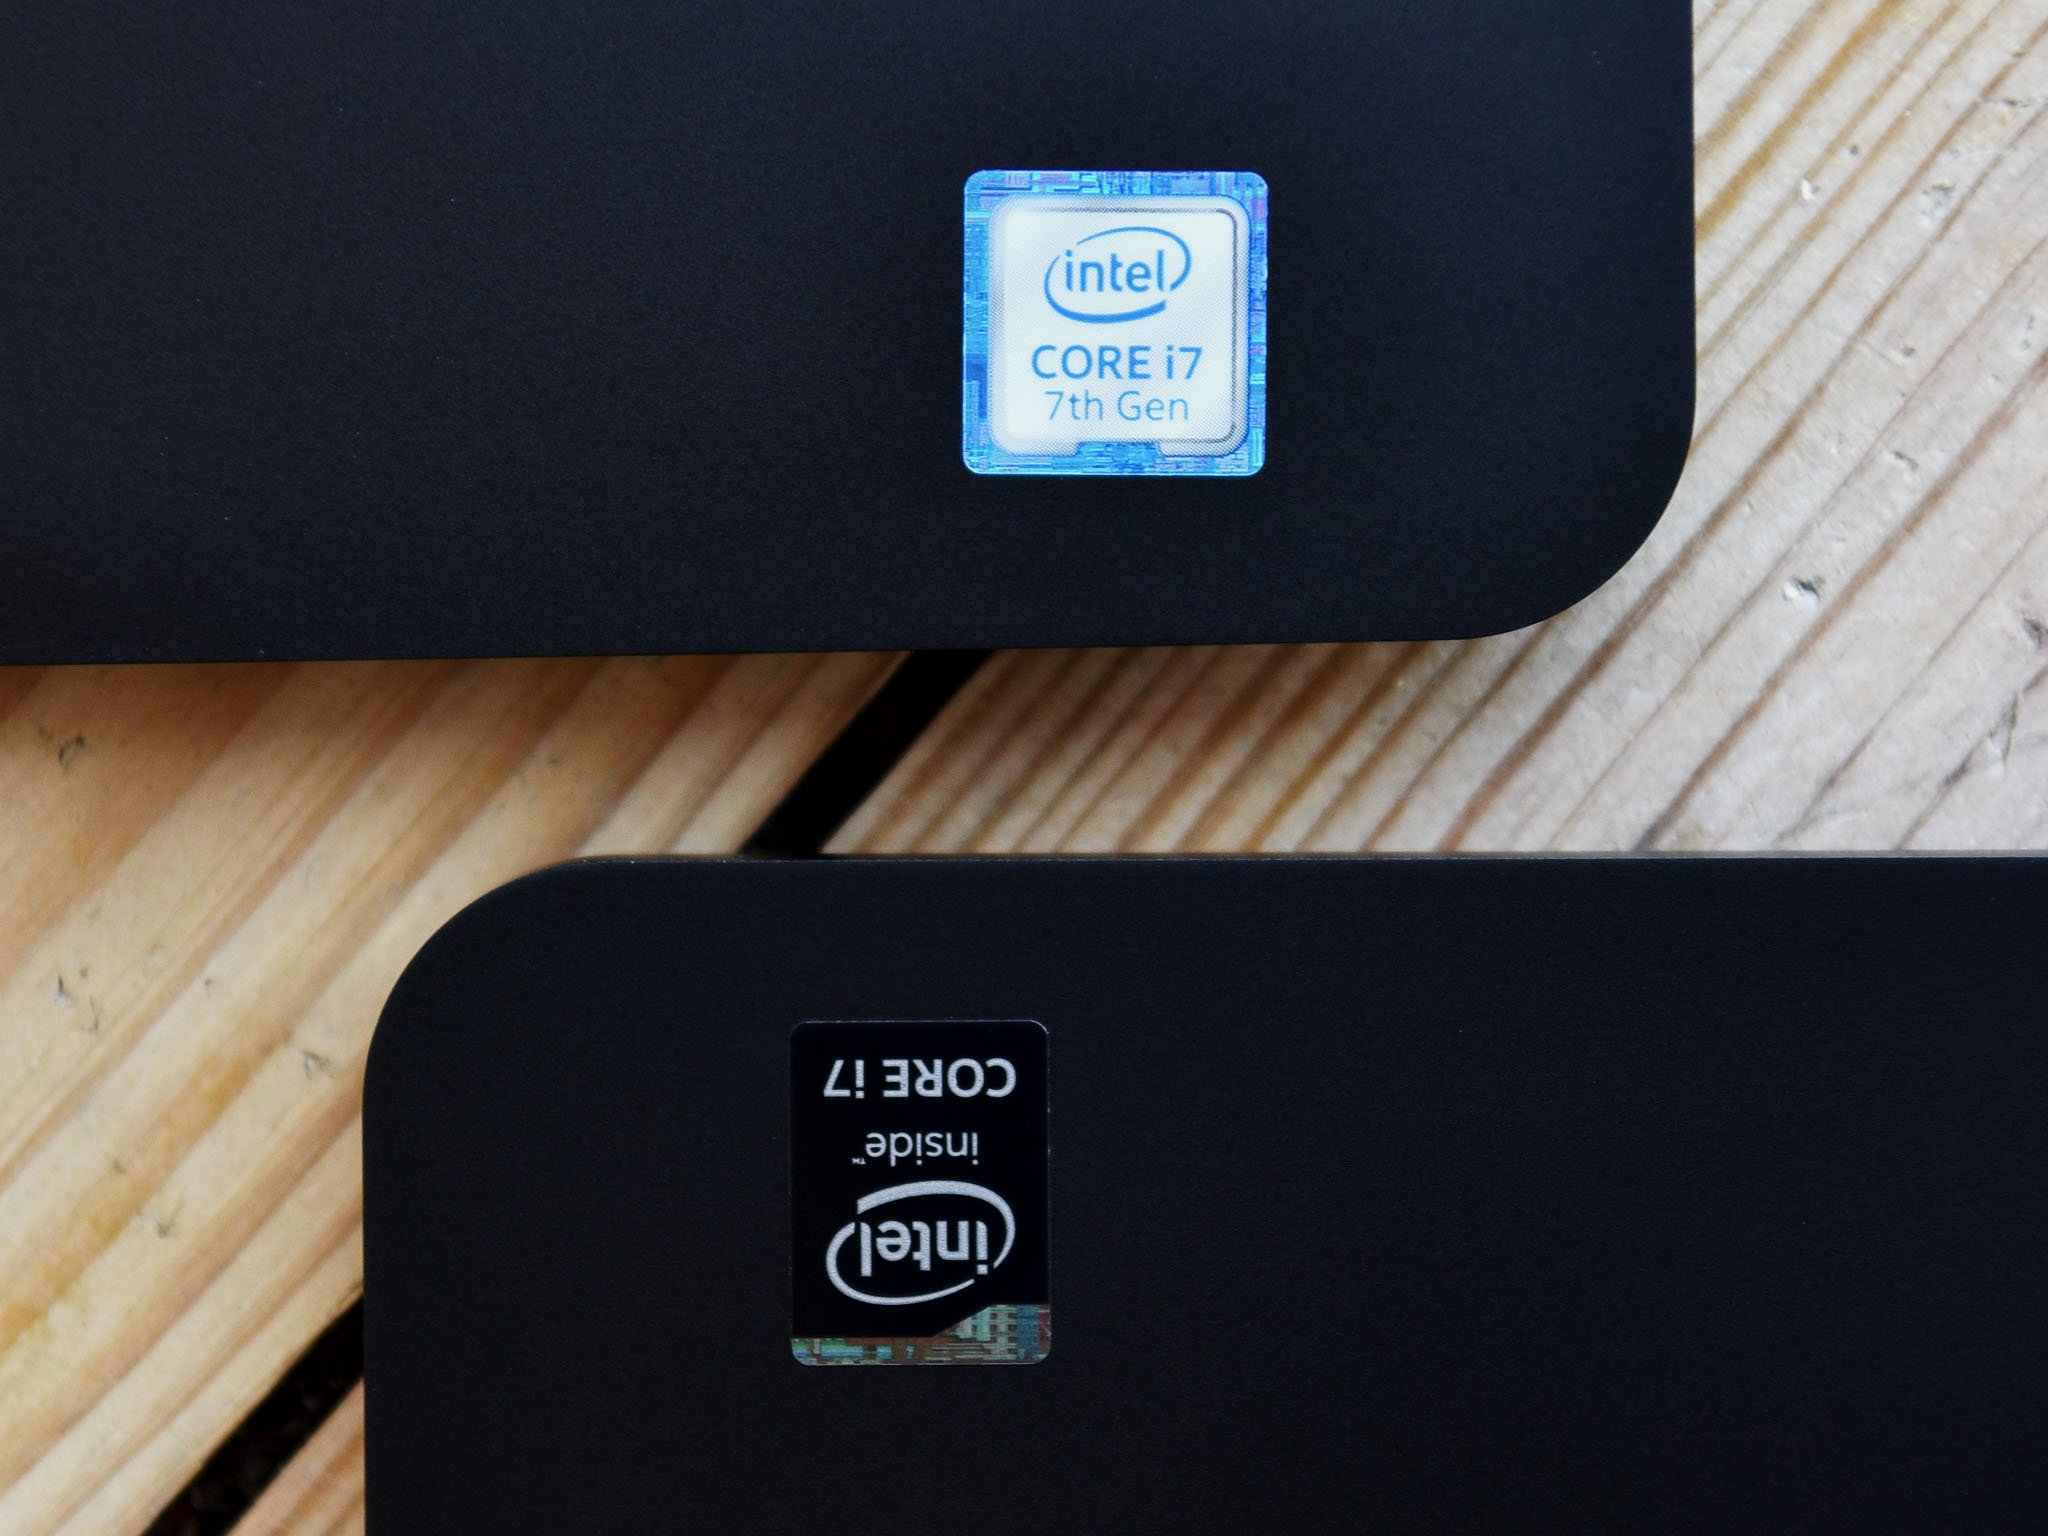 Intel processors hit with another security flaw that lets hackers access sensitive data